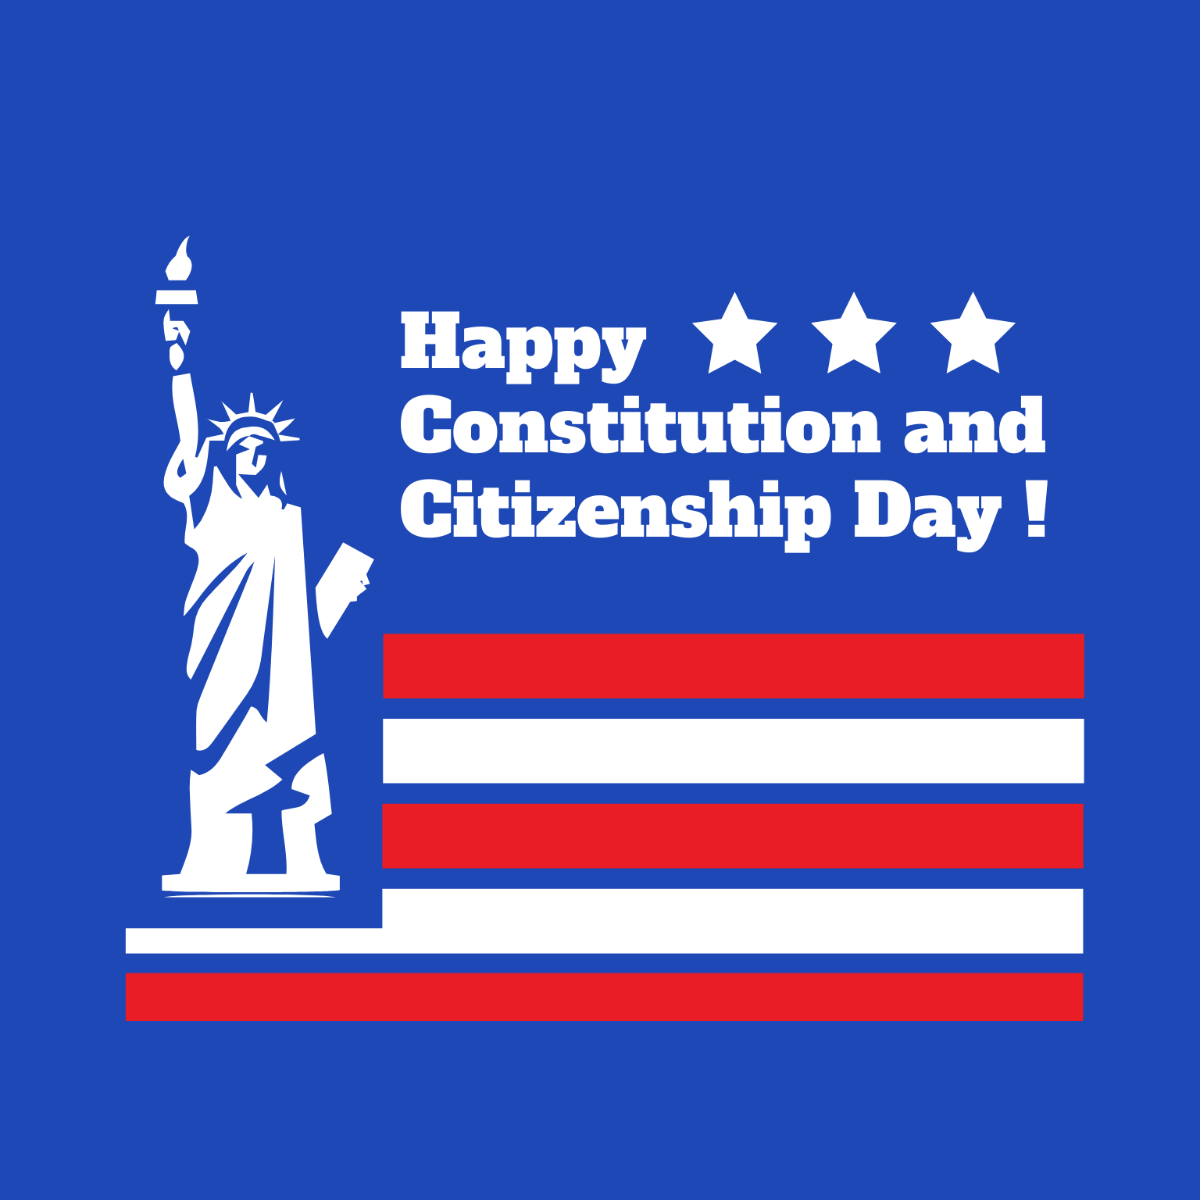 Free Constitution and Citizenship Day Flat Design Vector Template